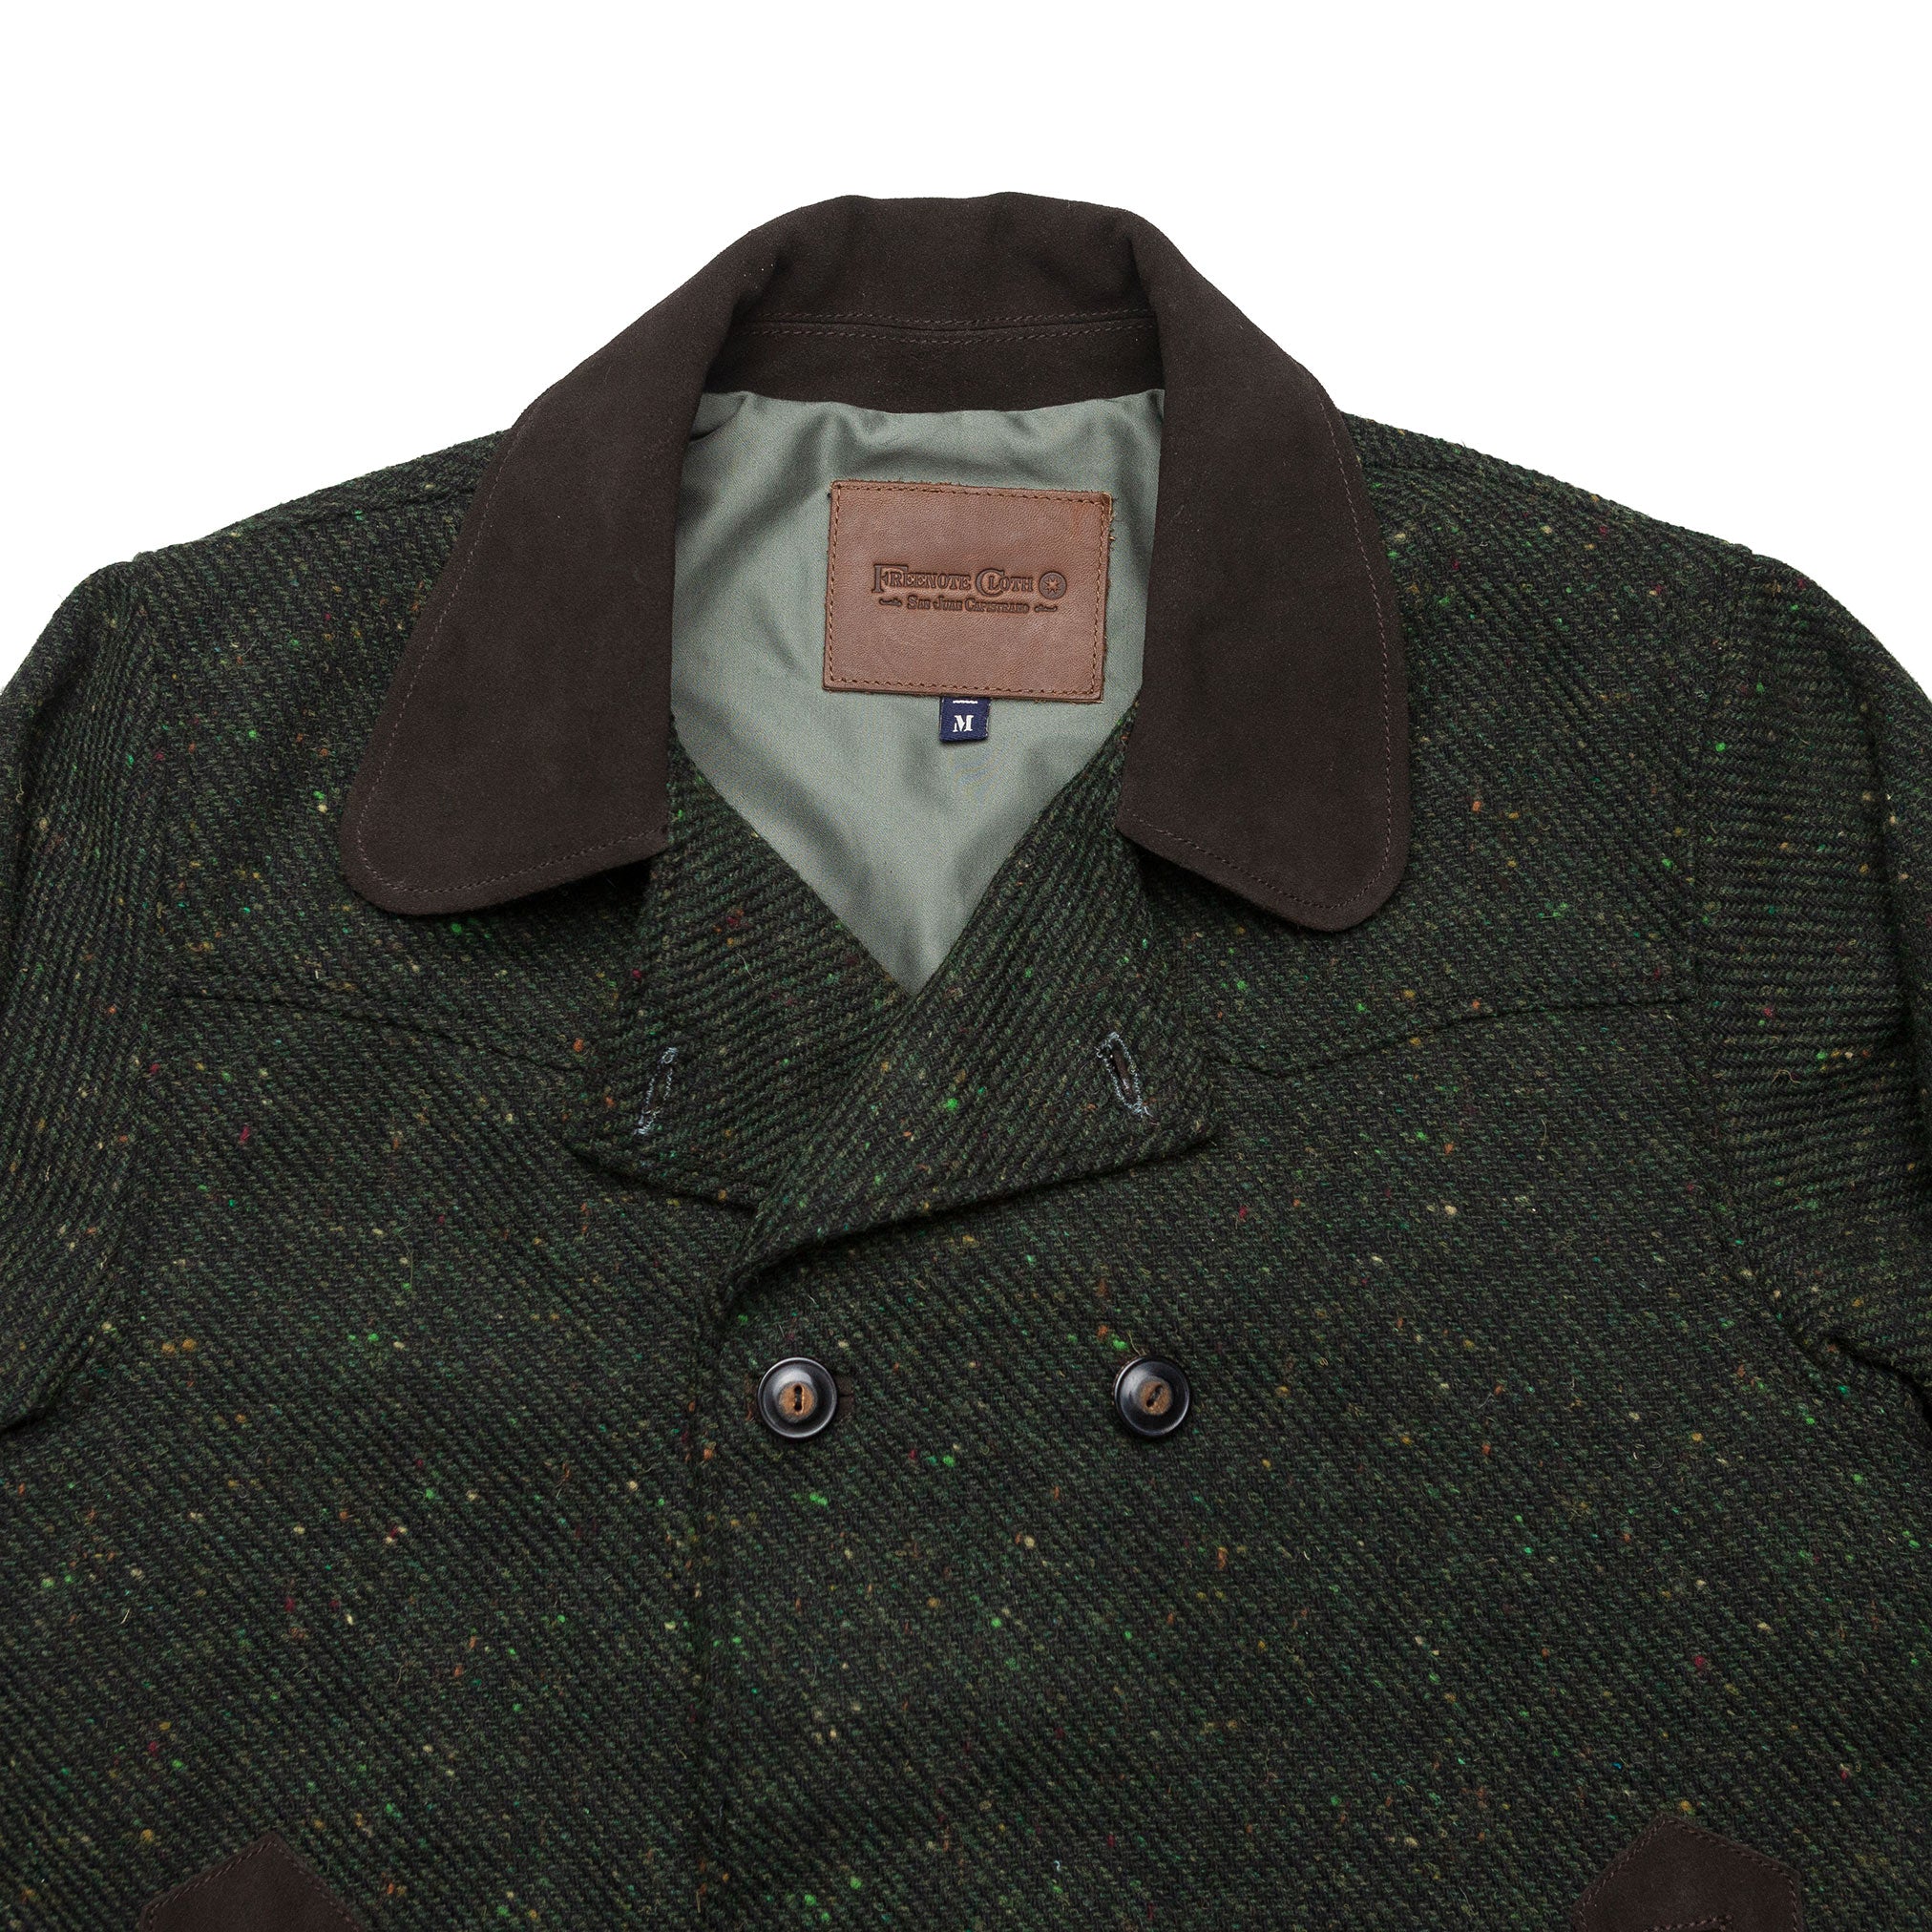 The Wells Jacket in Olive